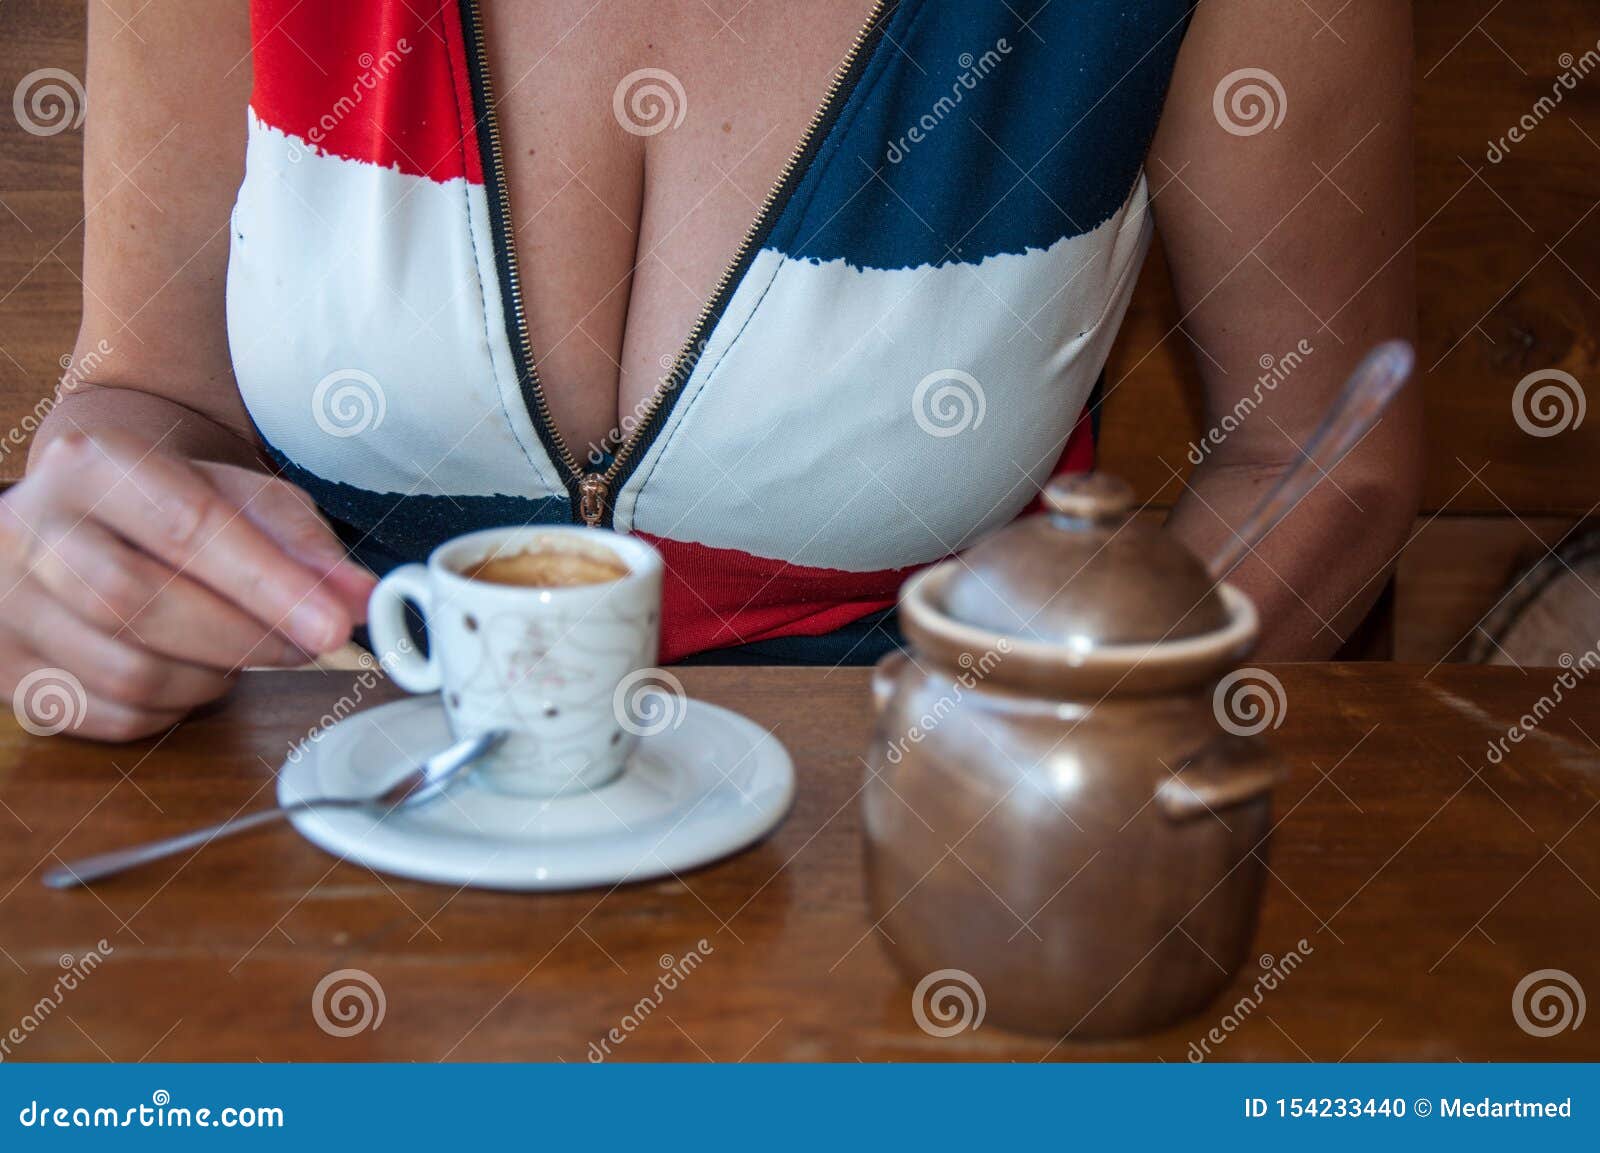 Coffee and boobs